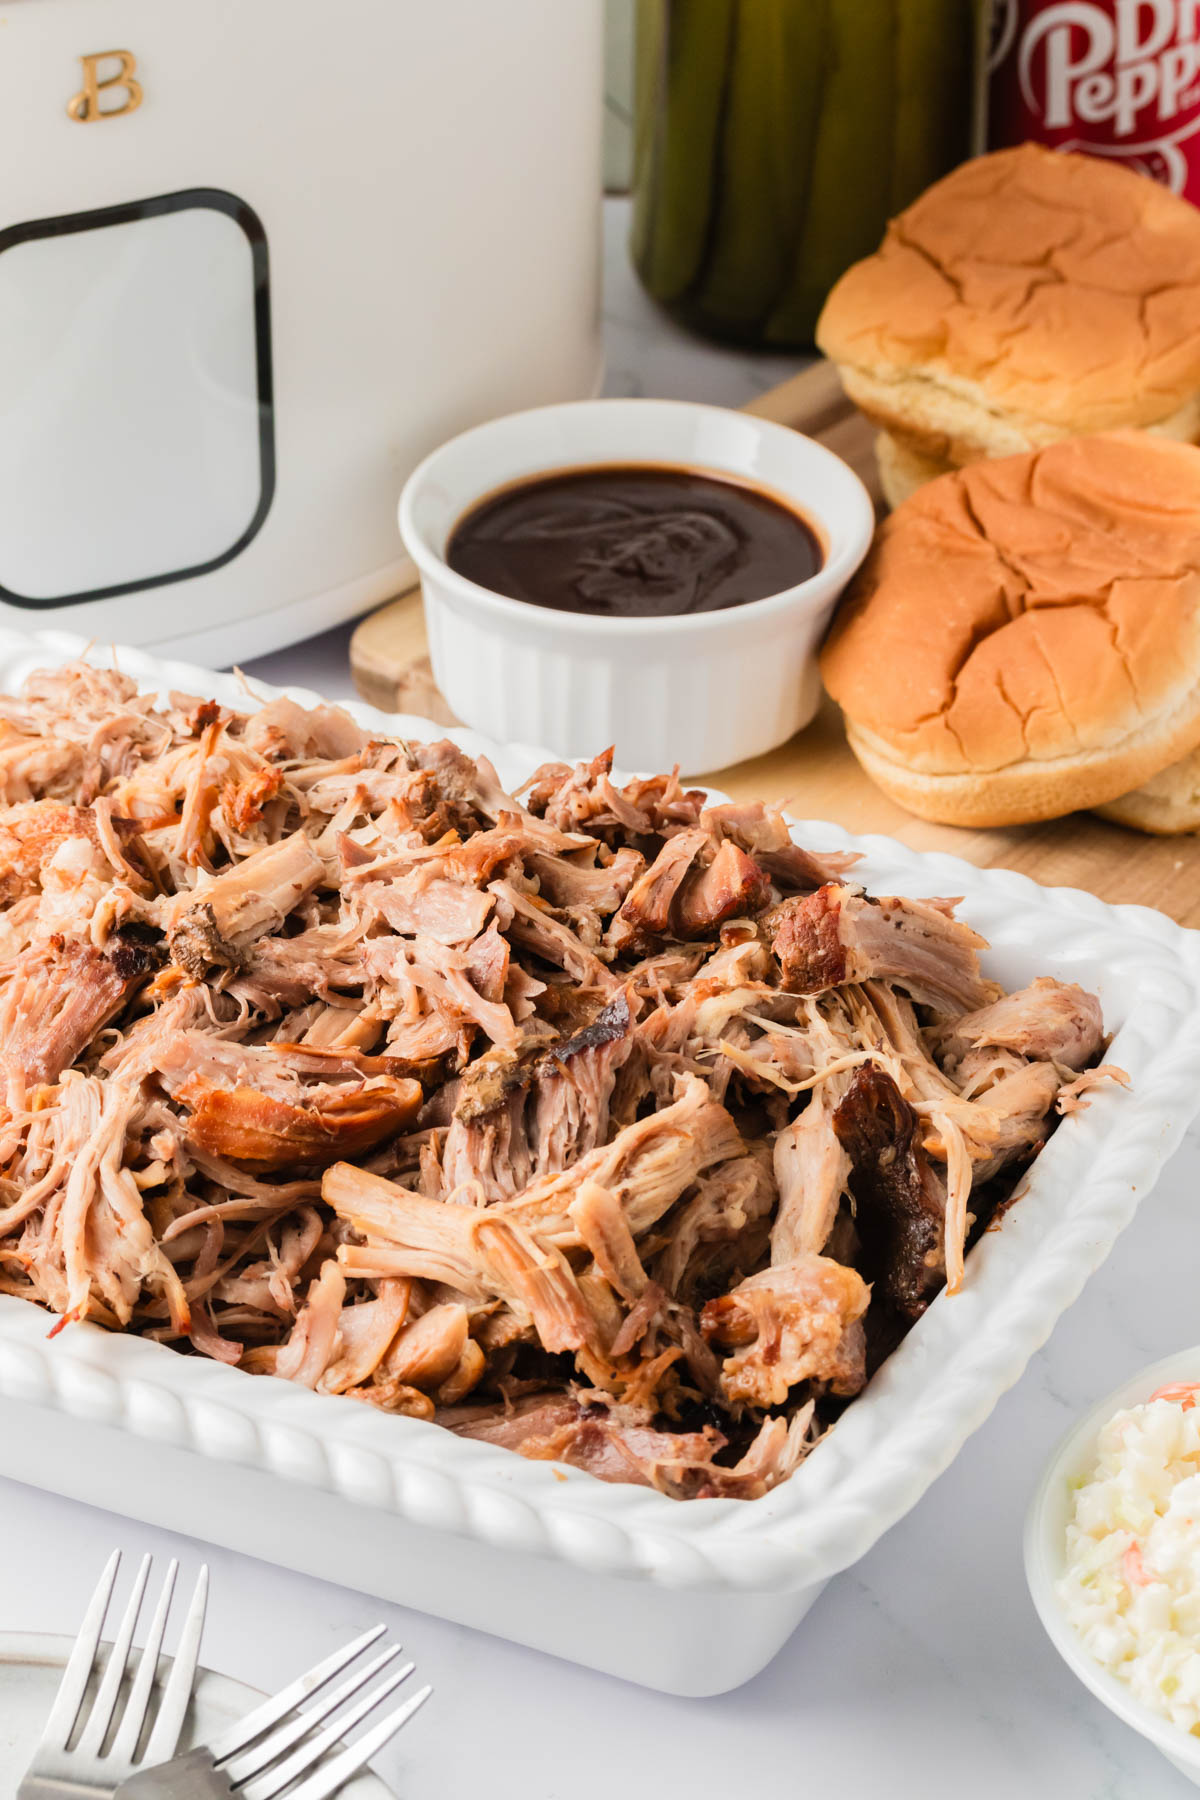 Cooked and shredded pulled pork is displayed in a tray in the foreground, with a dish of bbq sauce and hamburger buns visible in the background. 